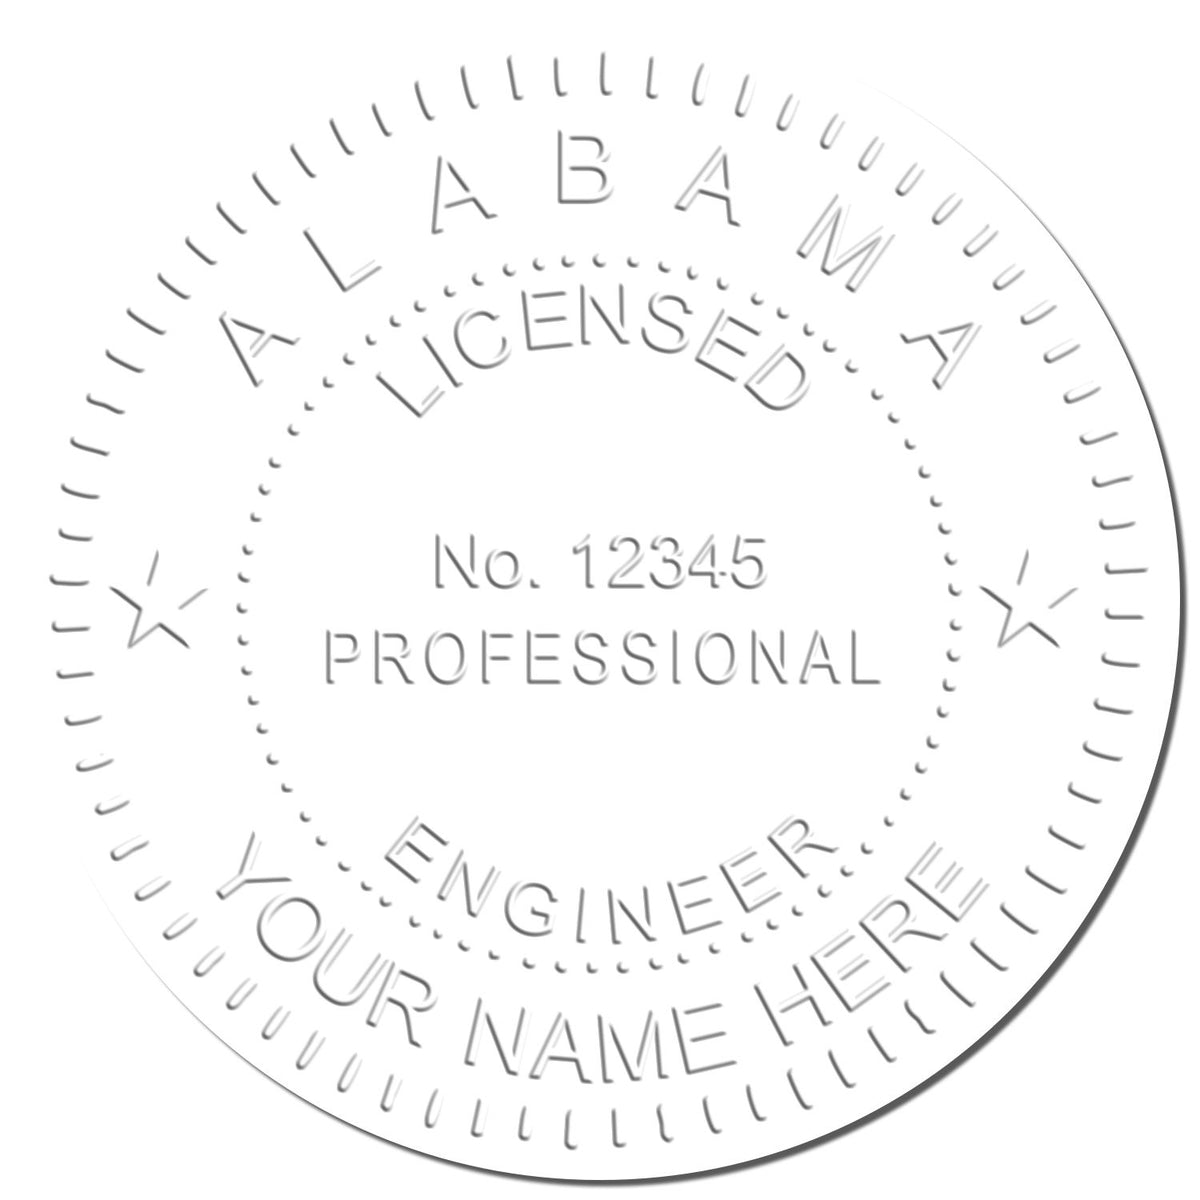 The Soft Alabama Professional Engineer Seal stamp impression comes to life with a crisp, detailed photo on paper - showcasing true professional quality.